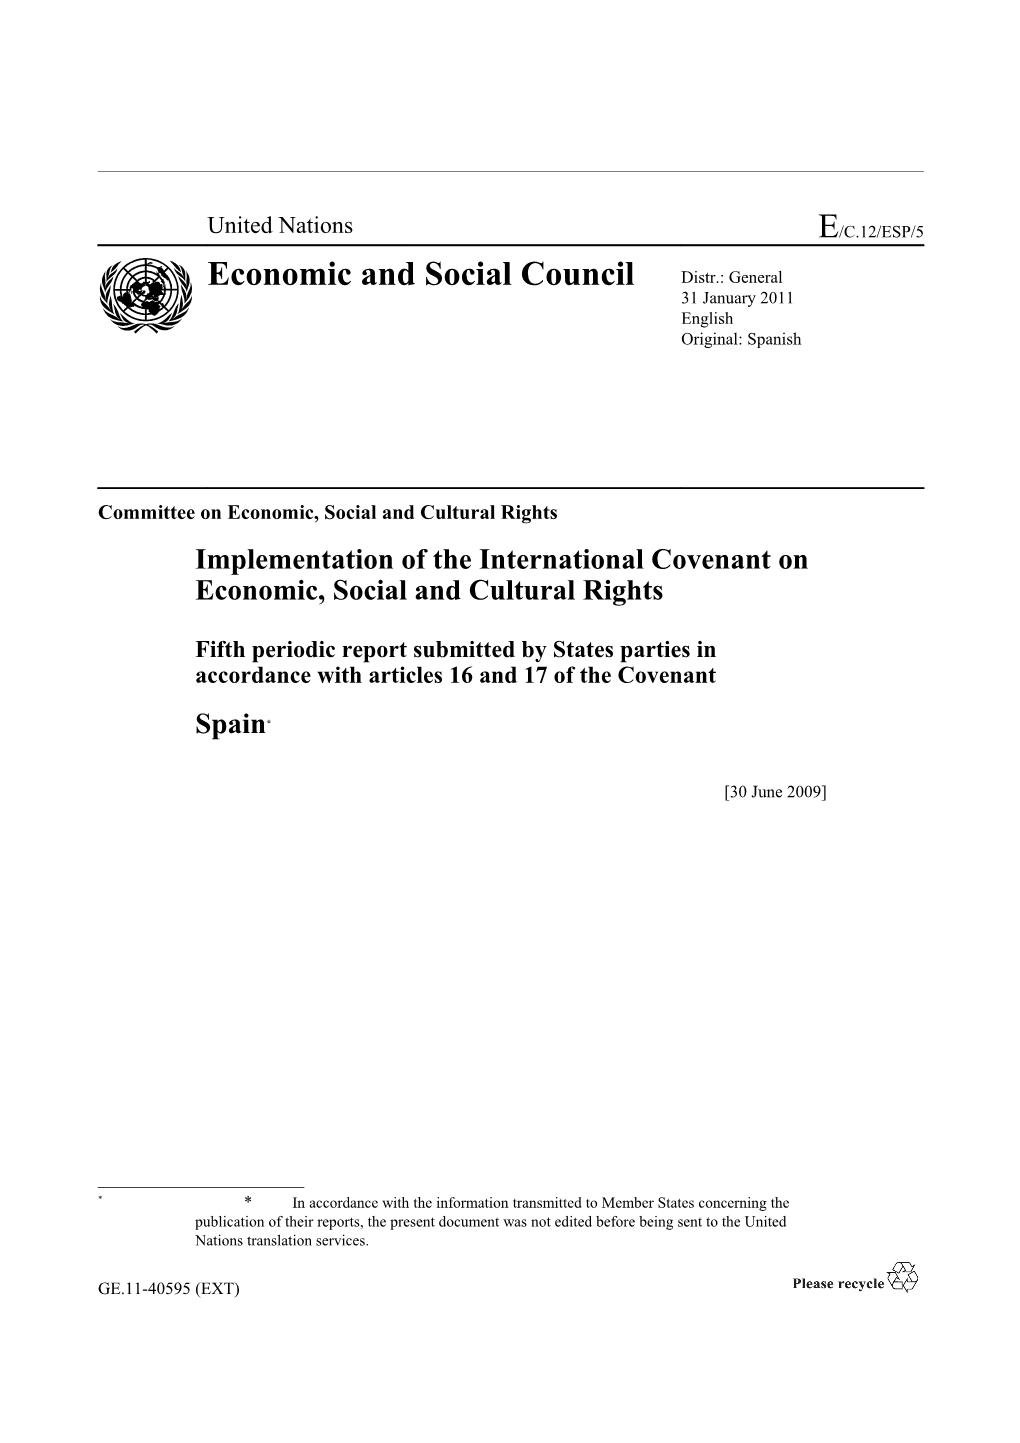 Committee on Economic, Social and Cultural Rights s2